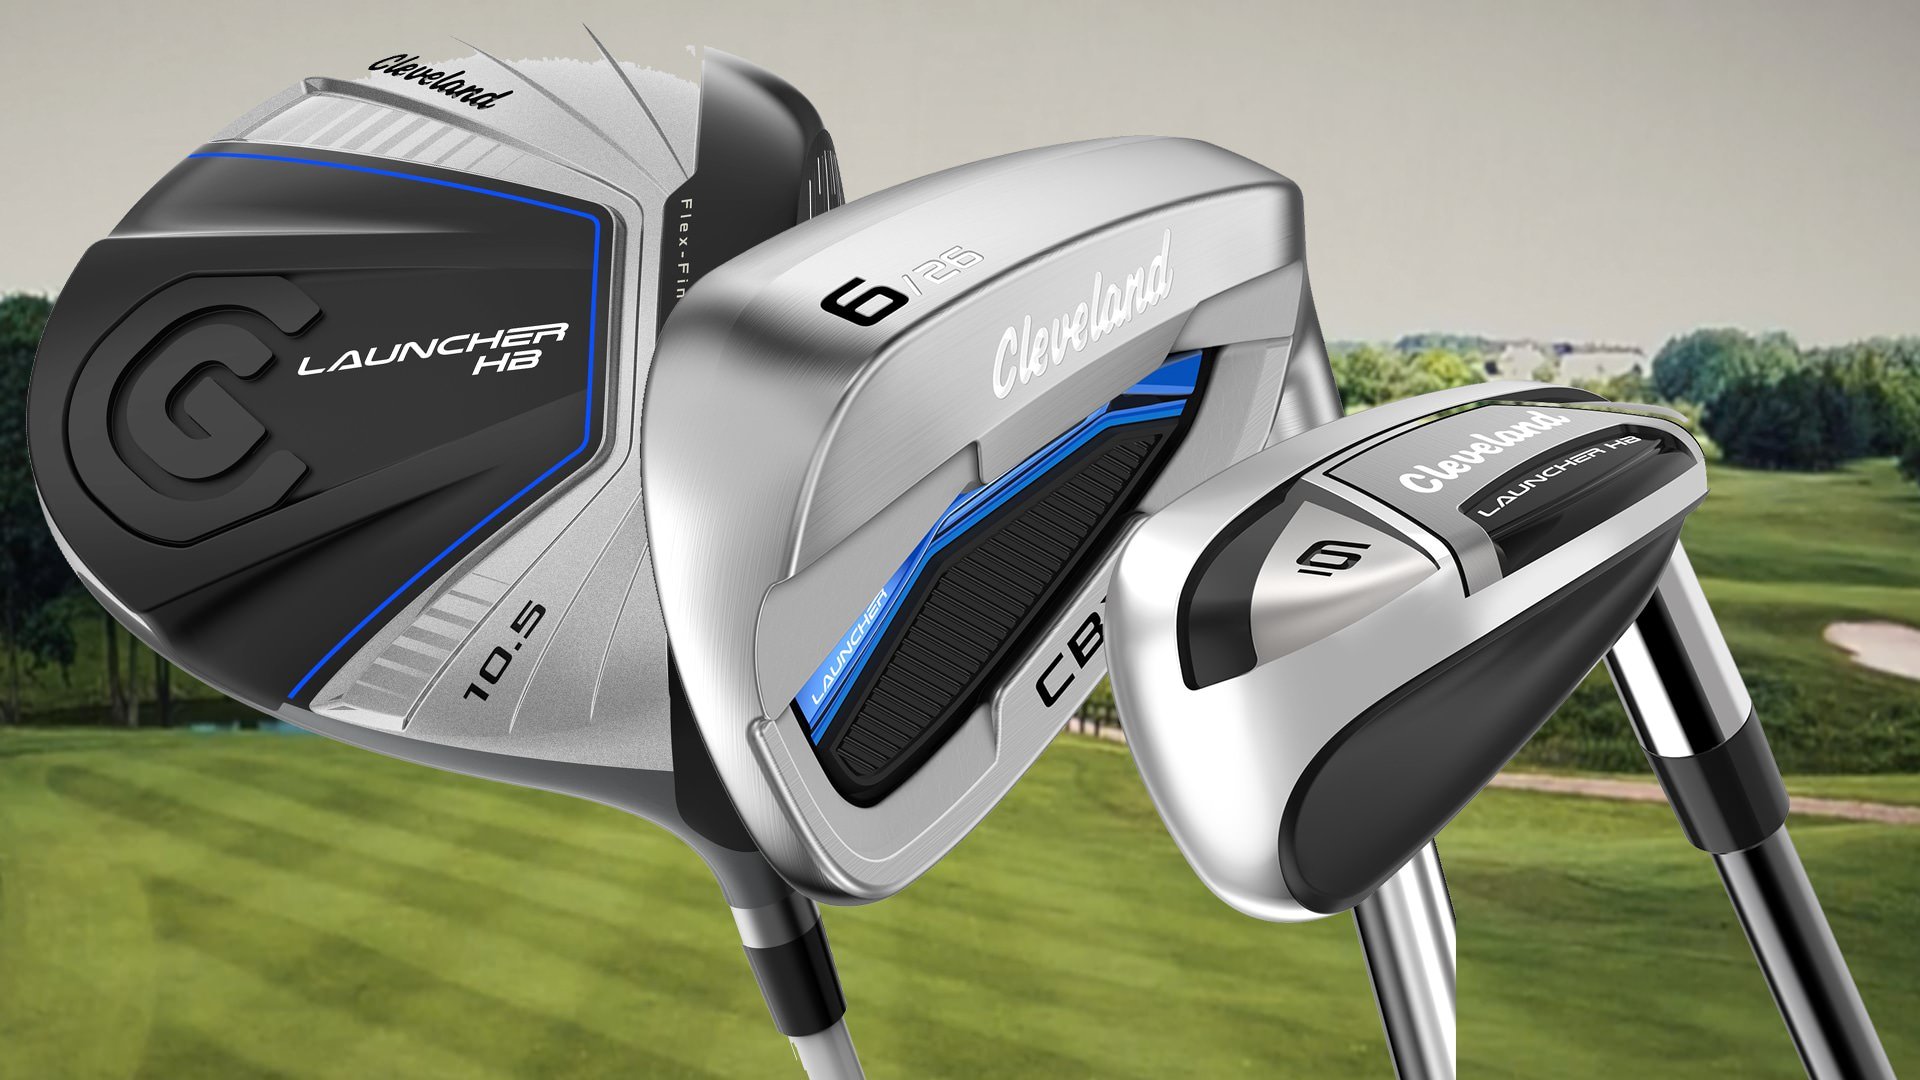 First look: New Cleveland Launcher woods and irons